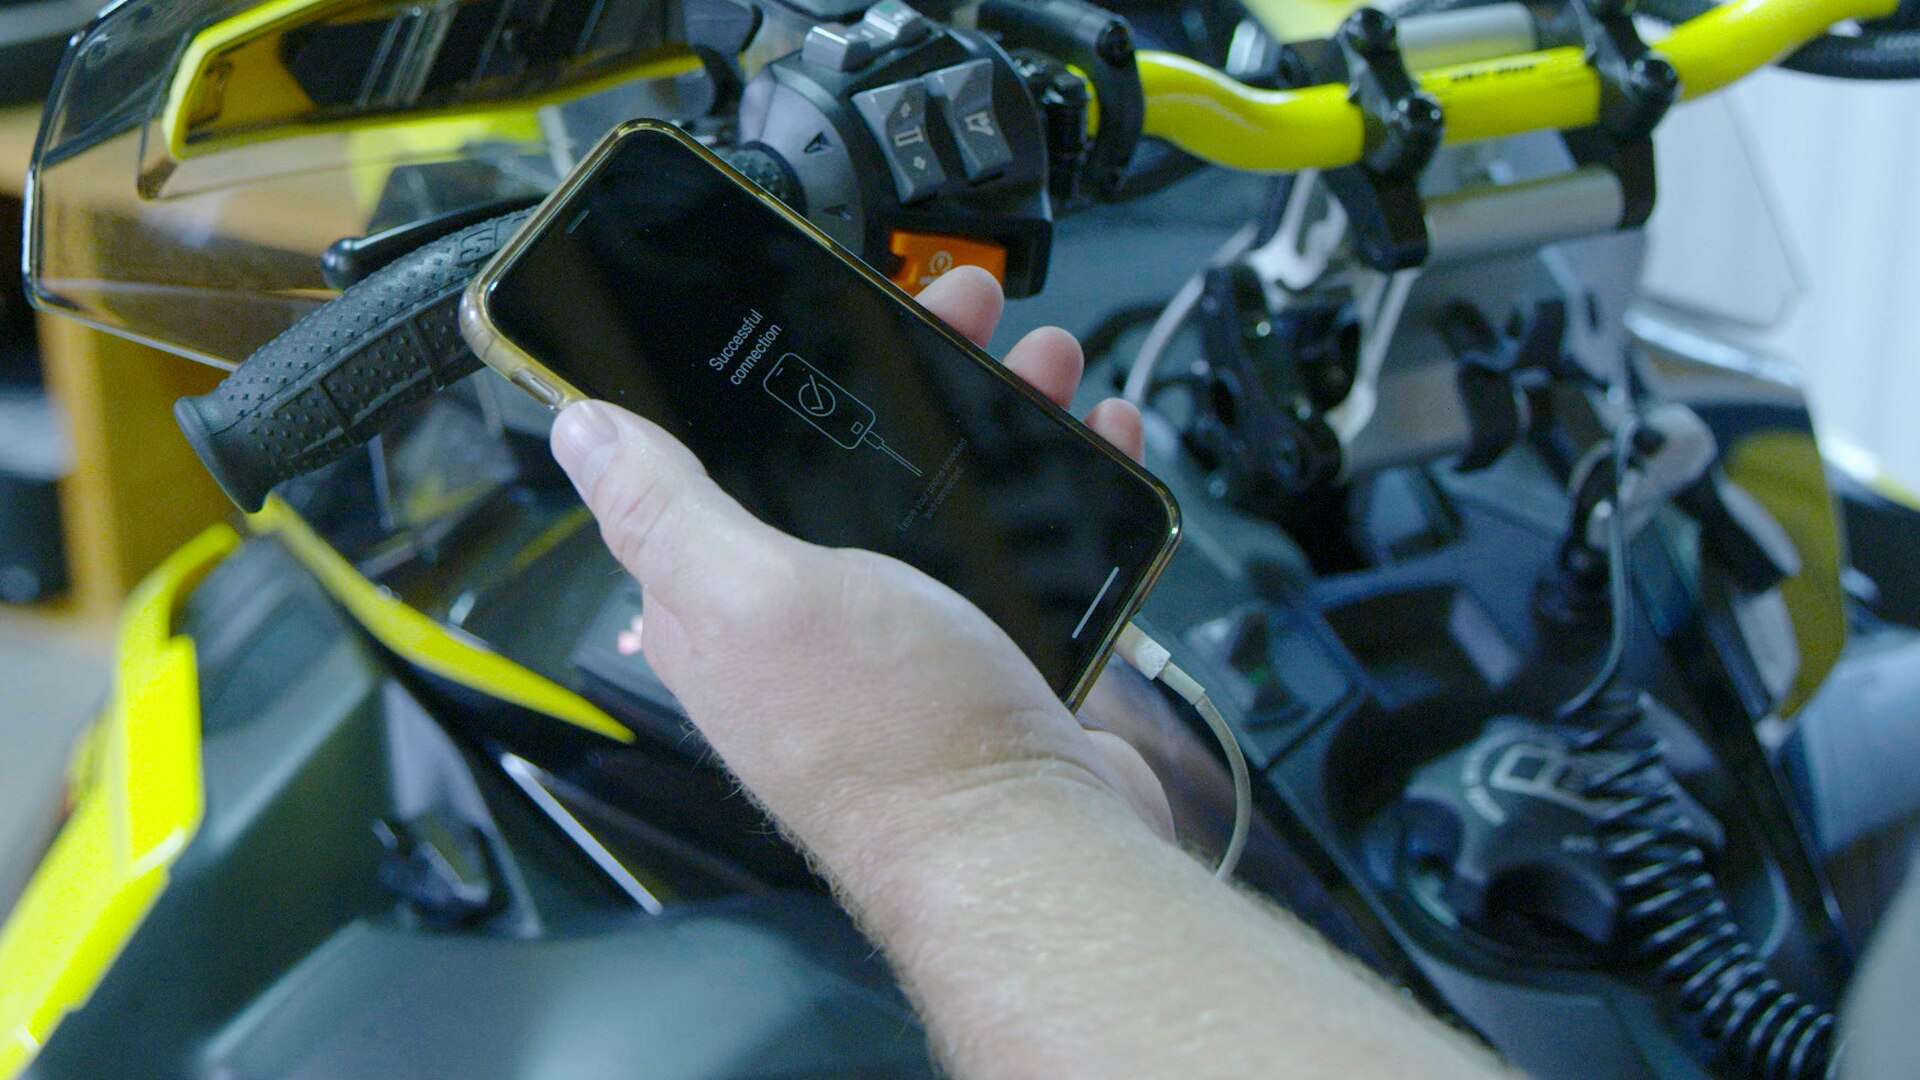 Troy Oleson using BRP GO! App with his Ski-Doo snowmobile